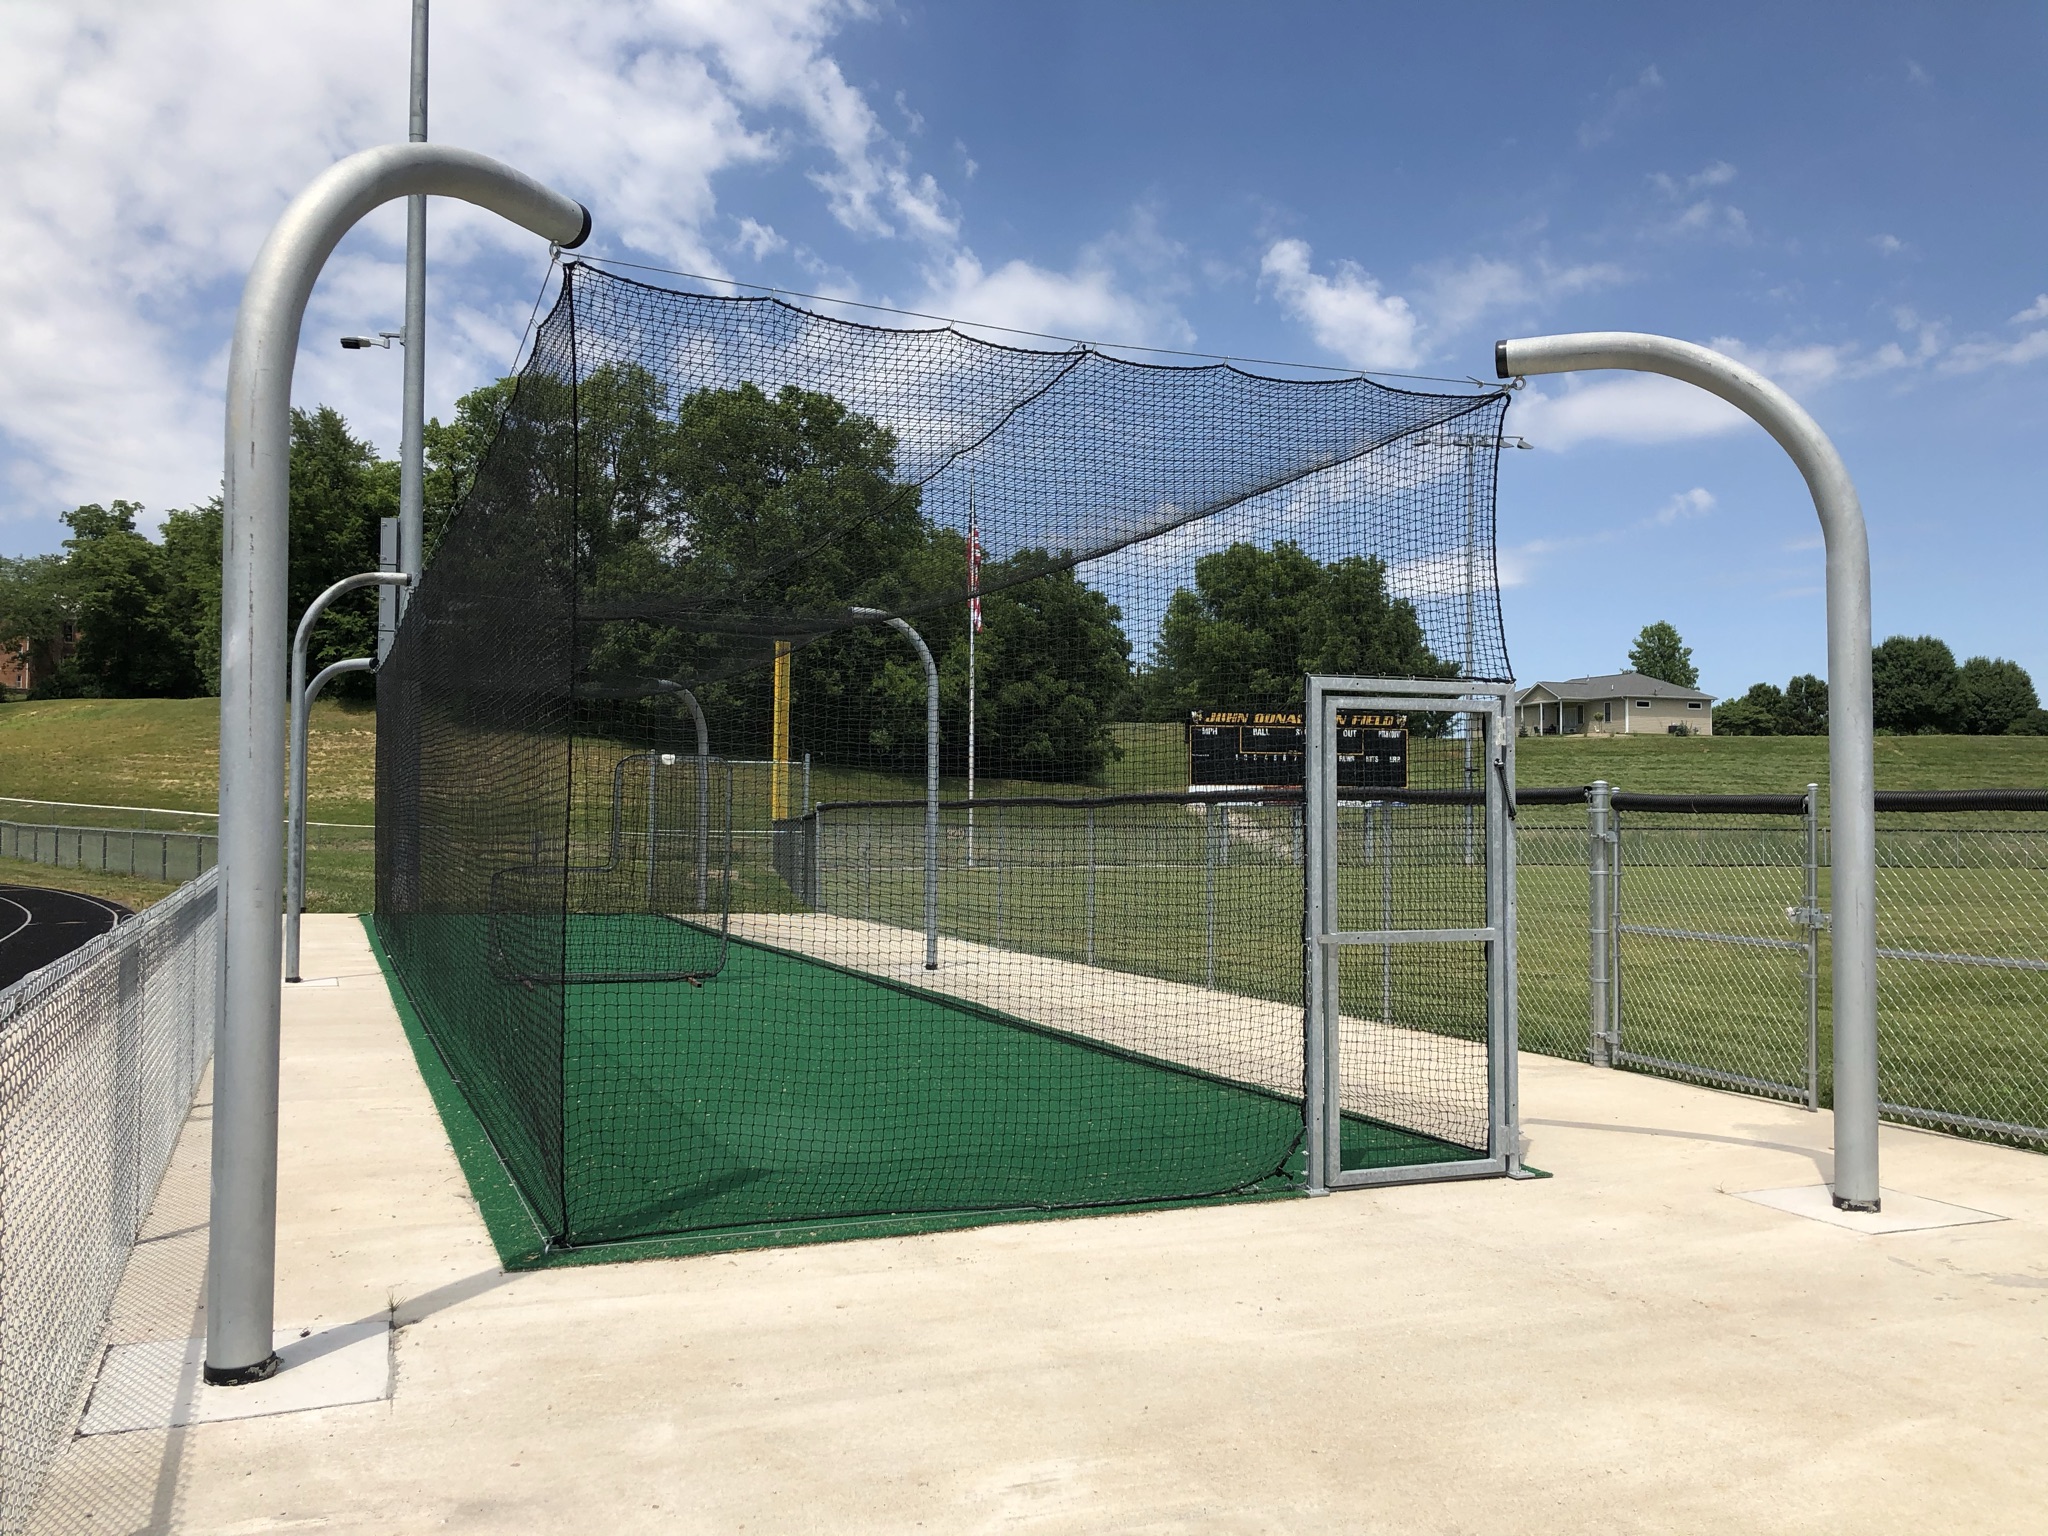 Outdoor Batting Cage System